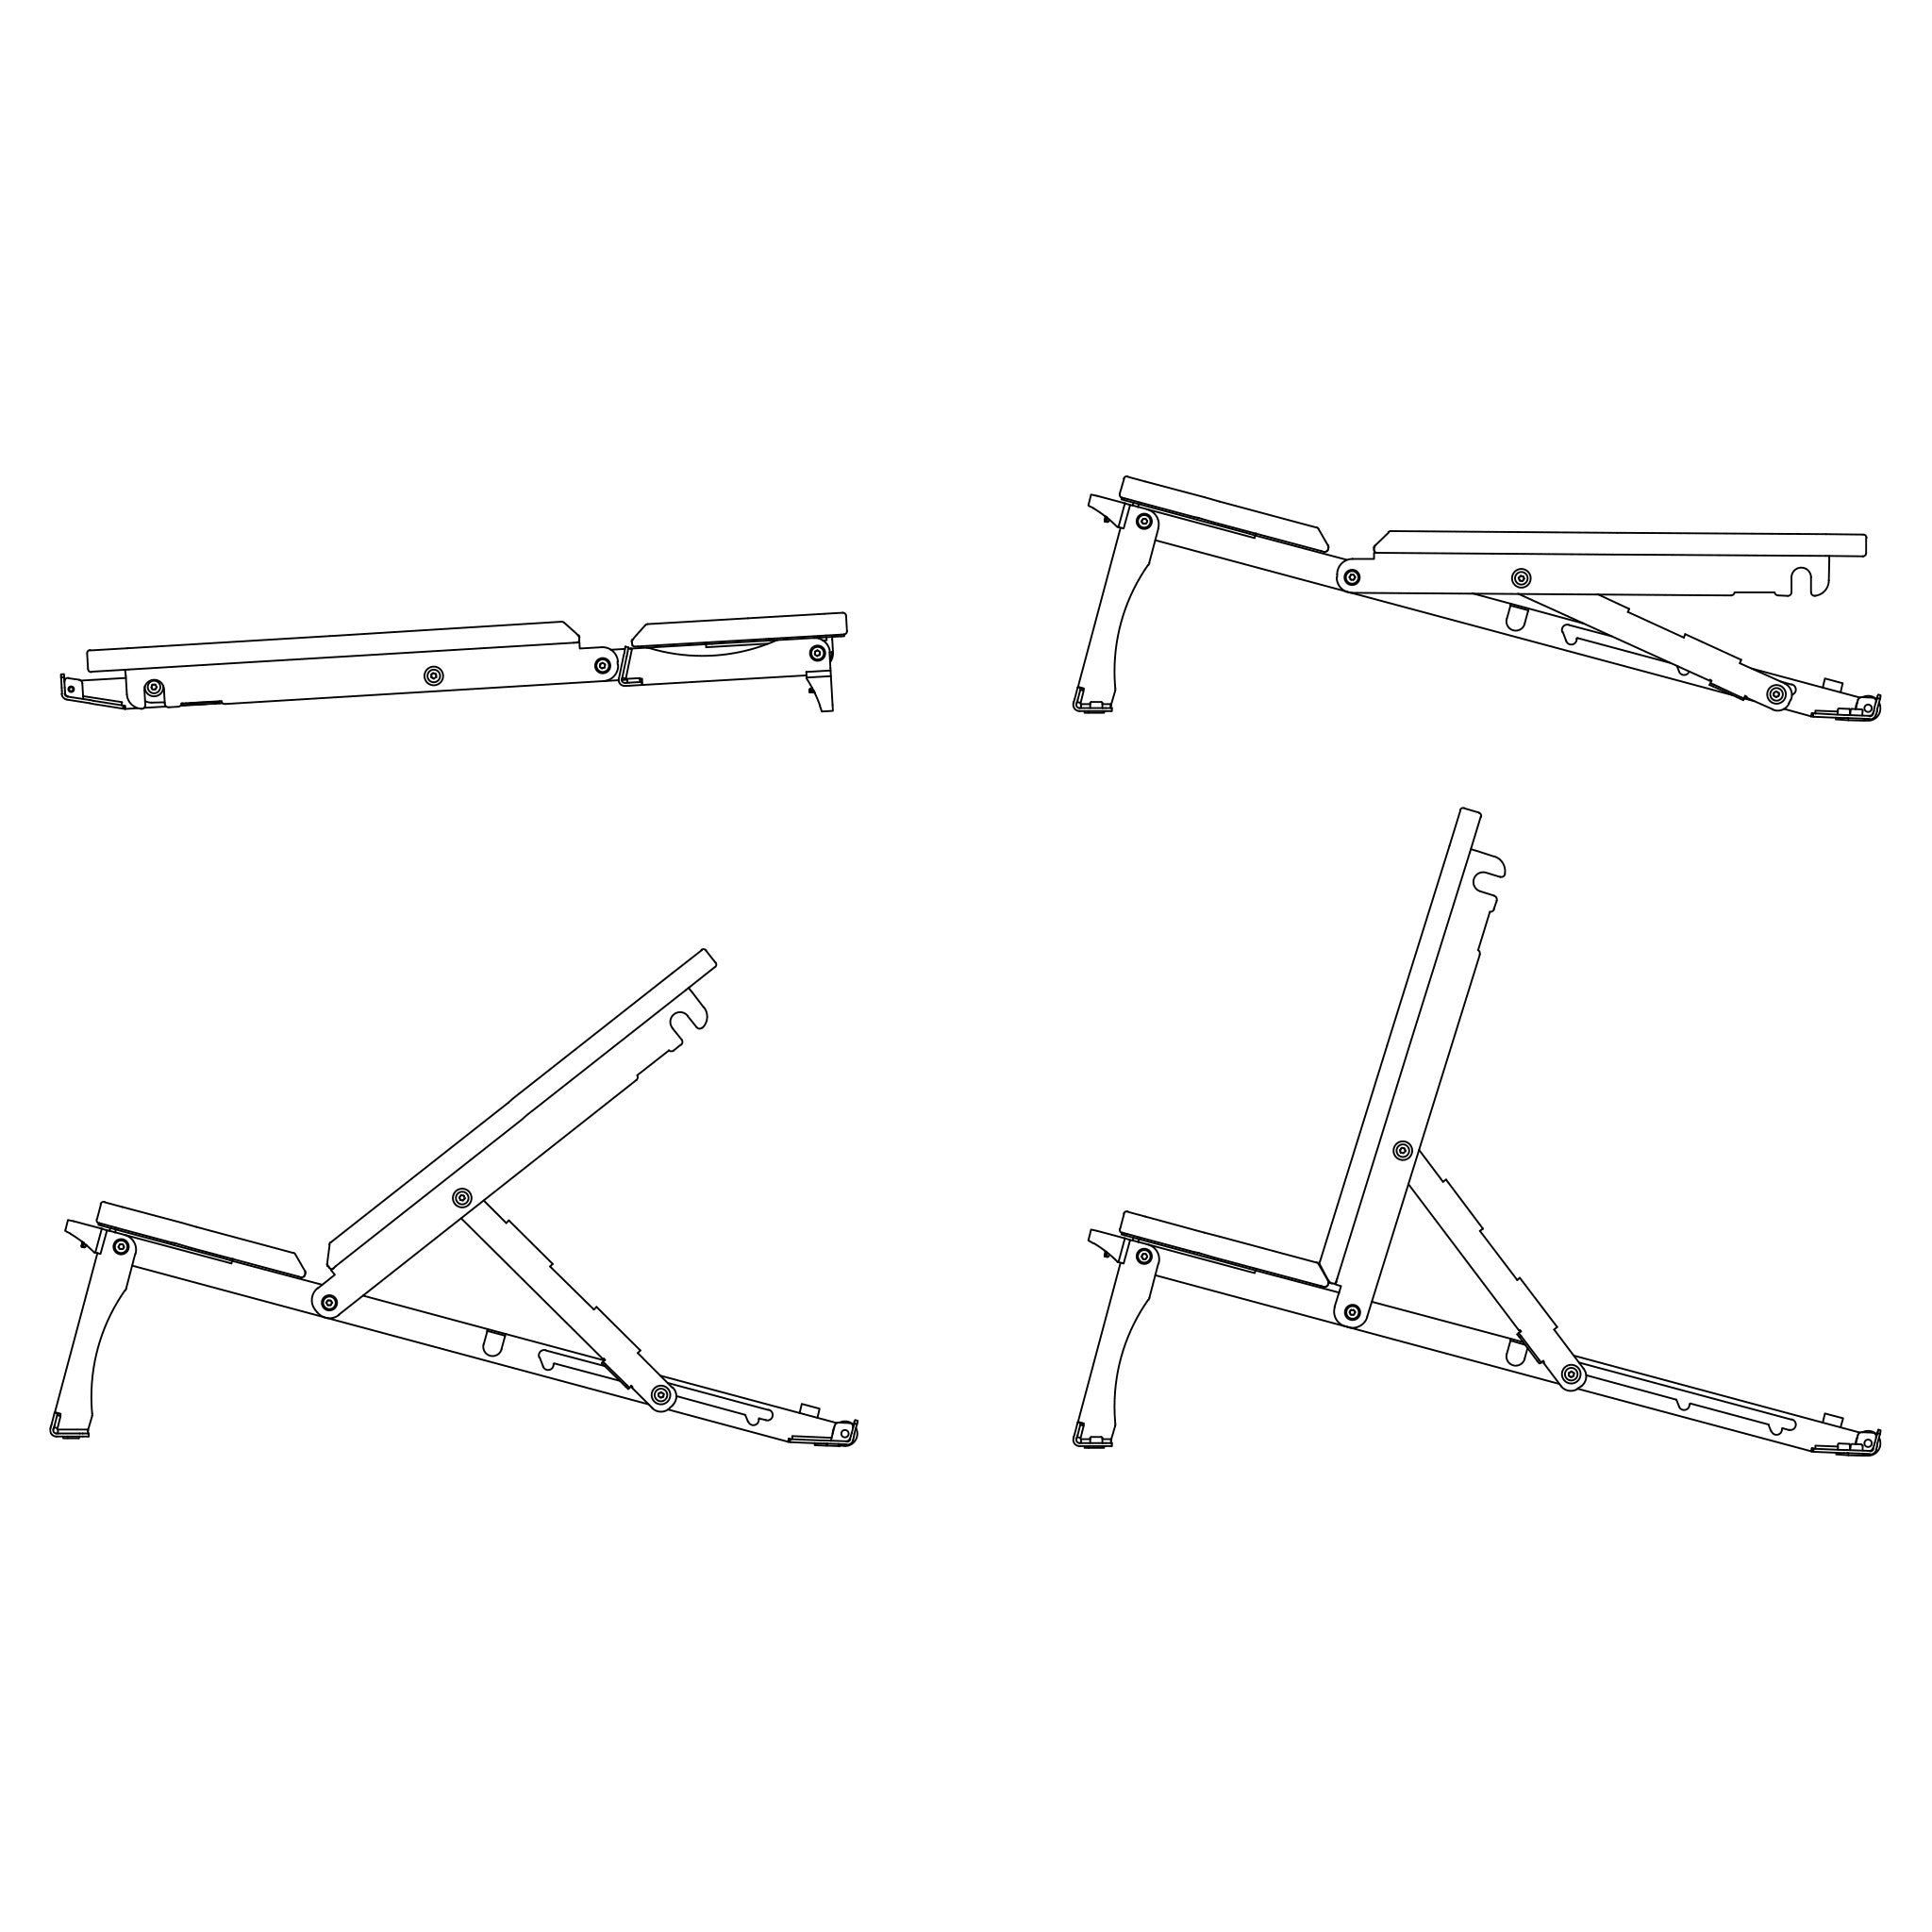 Angle variations of the folding bench